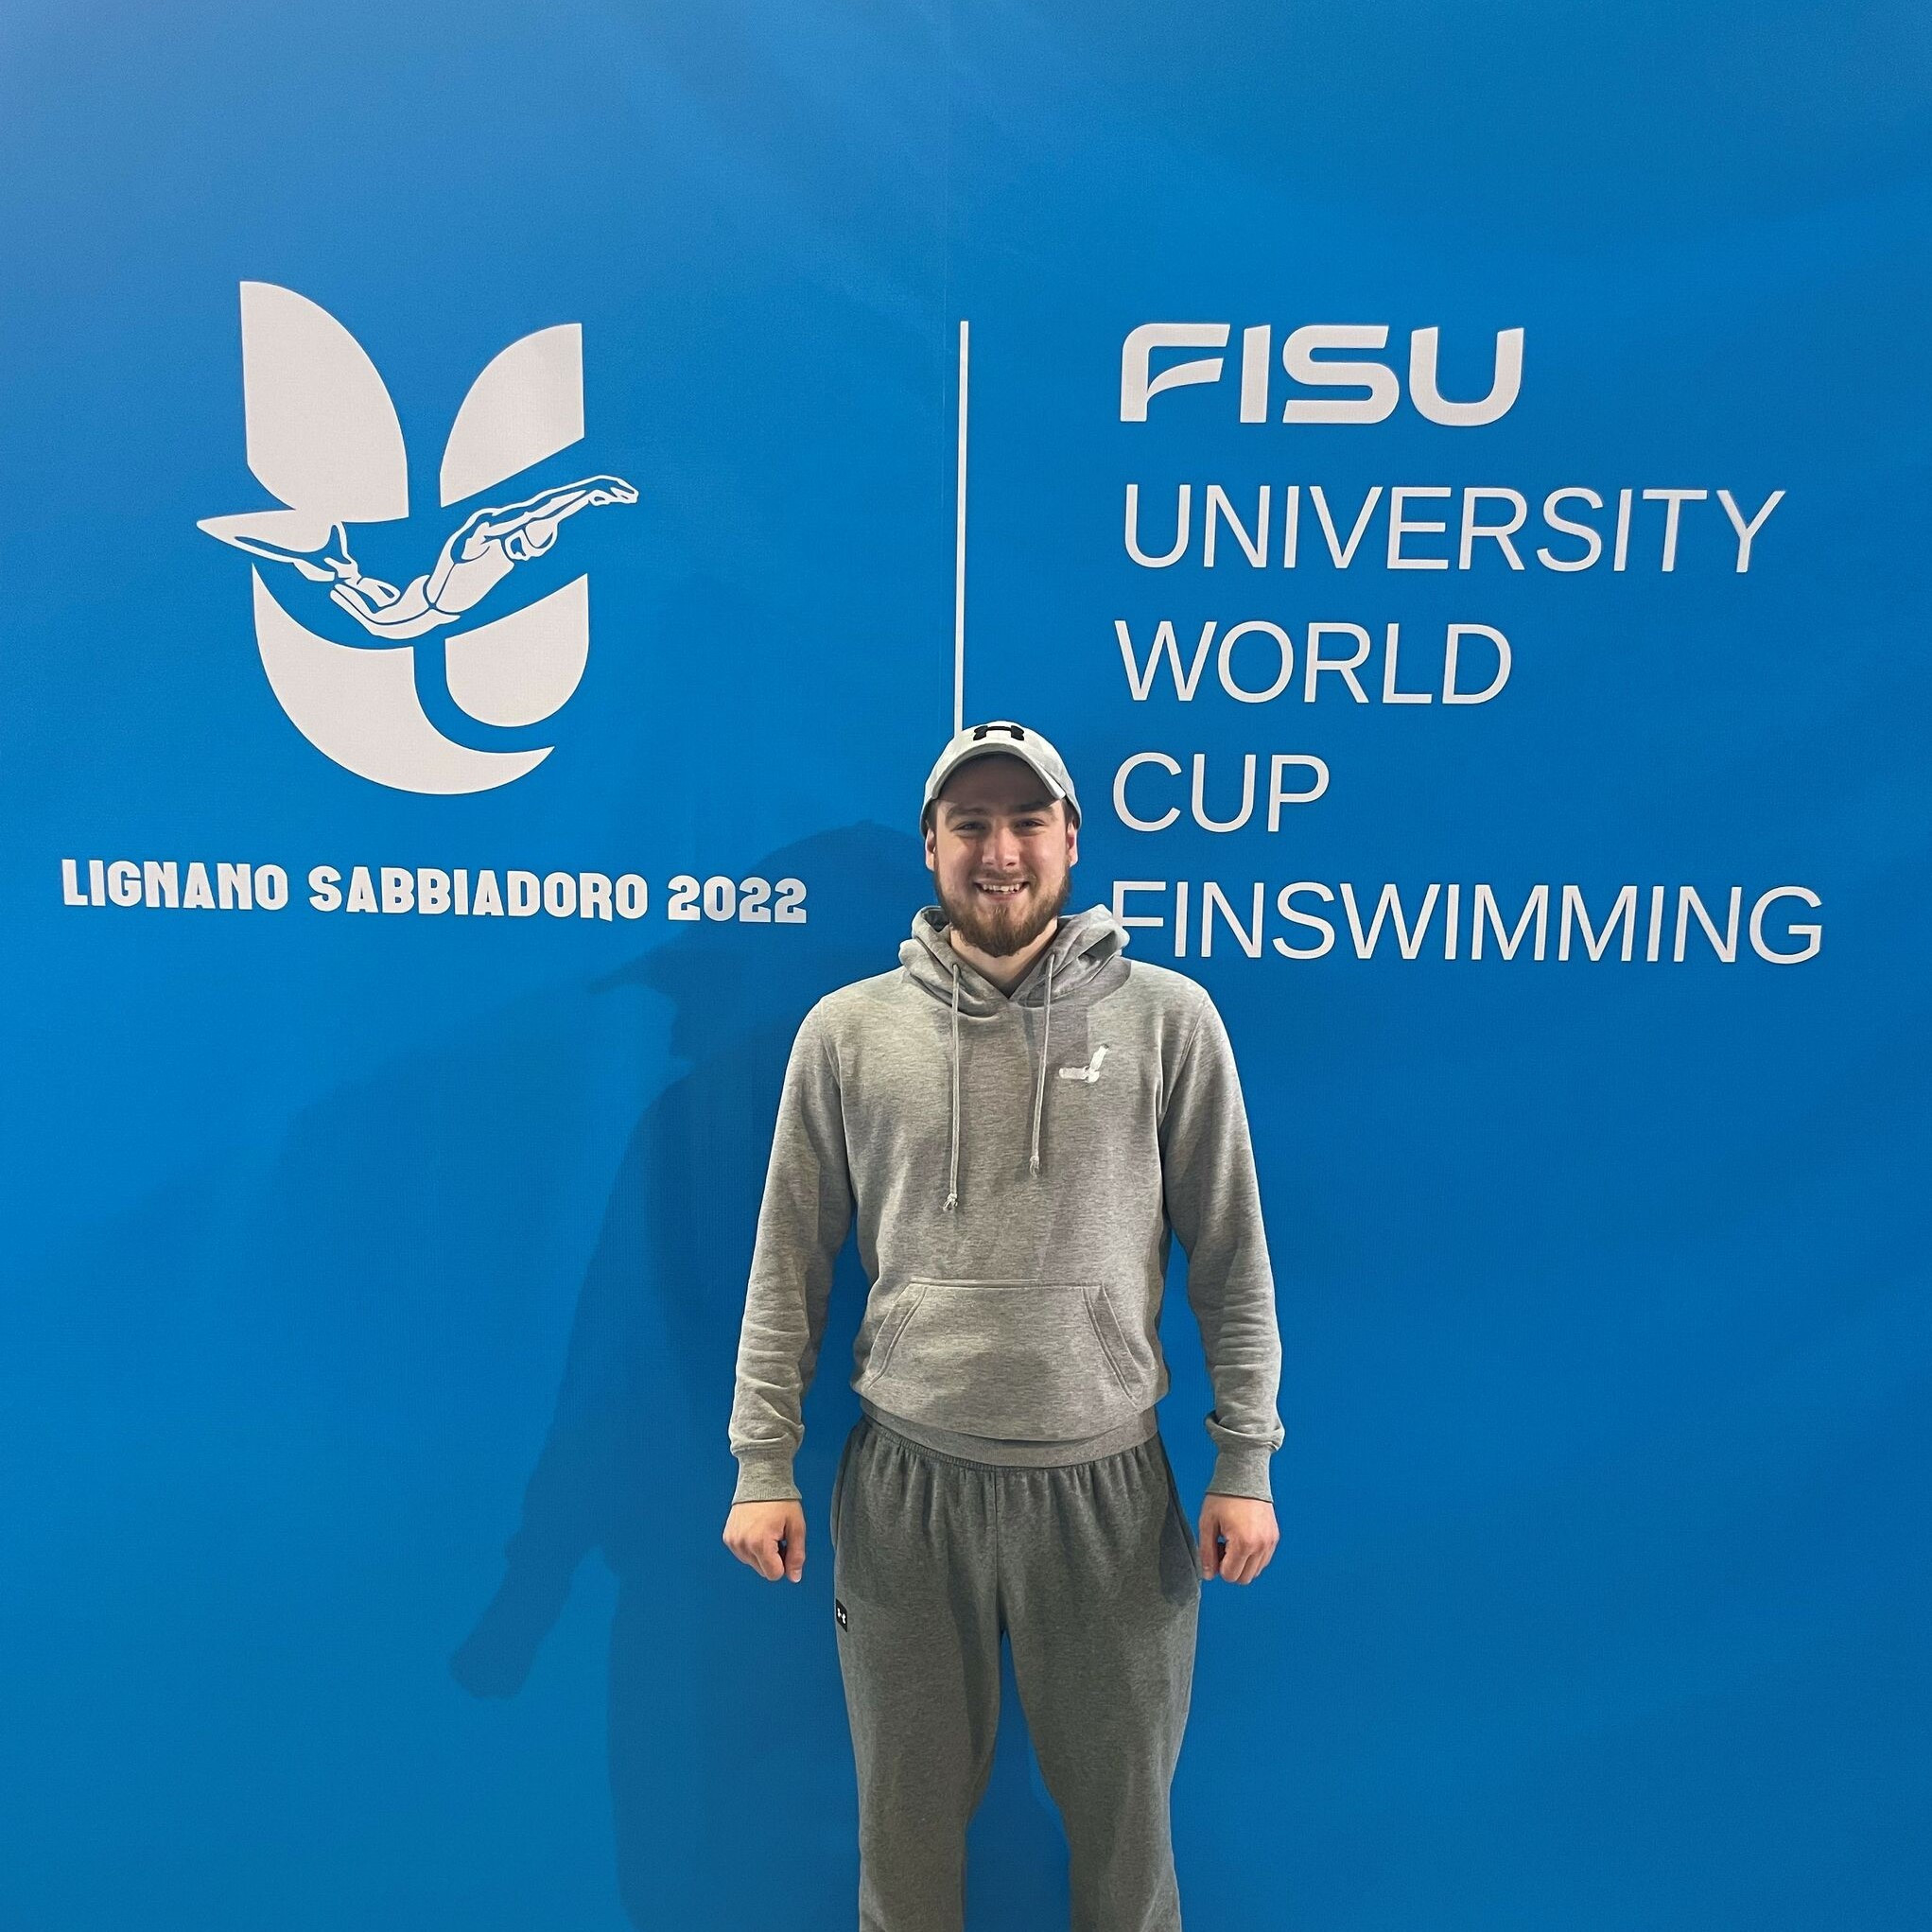 Ukraine's Oleksii Zakharov - a surface finswimming world champion over 400 and 800 metres - is among the athletes set to race ©FISU